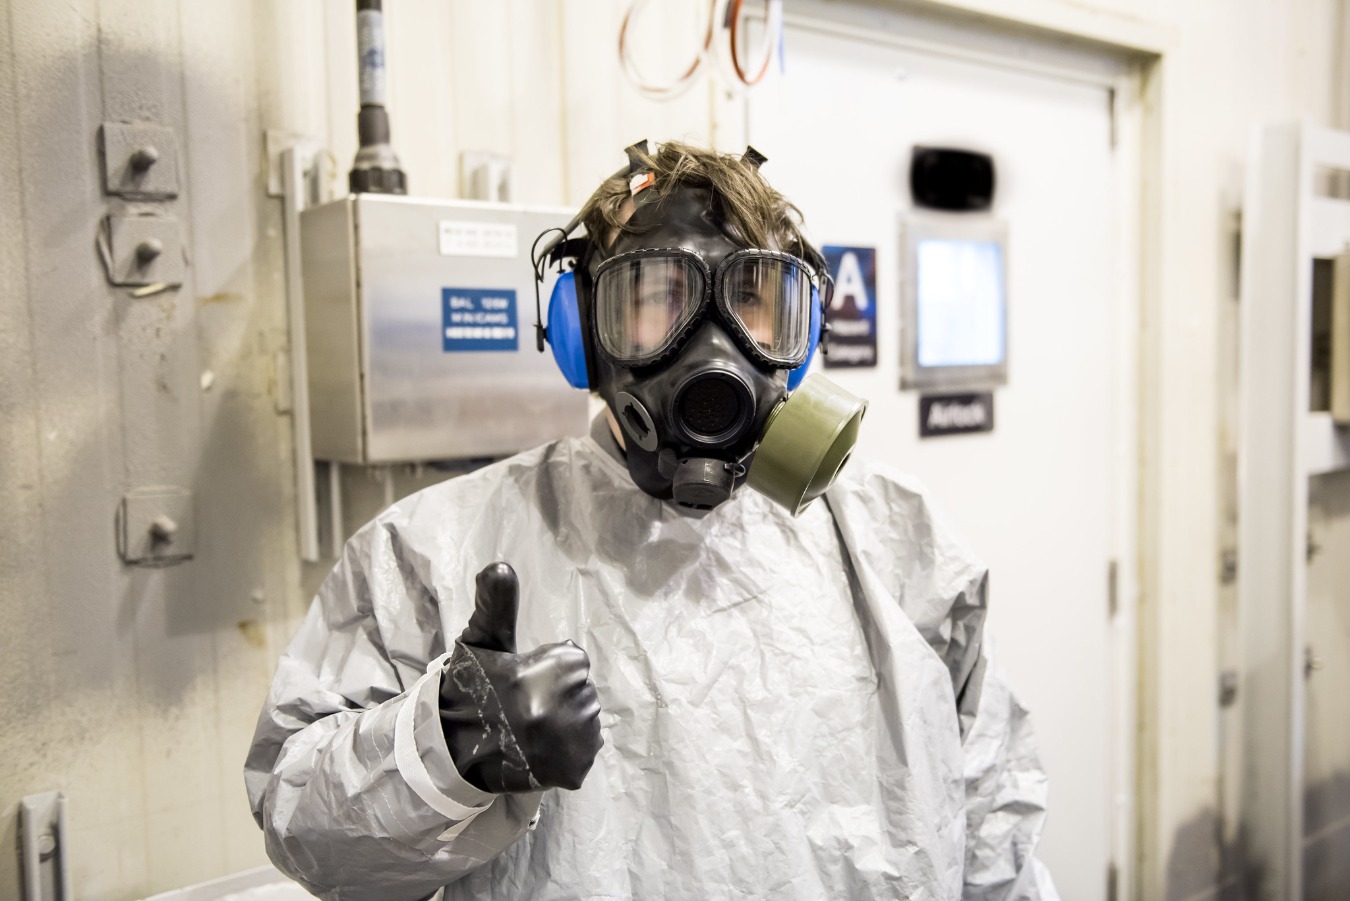 Russia Is Ready for a Nuclear, Chemical or Biological Weapons-Based War | The National Interest